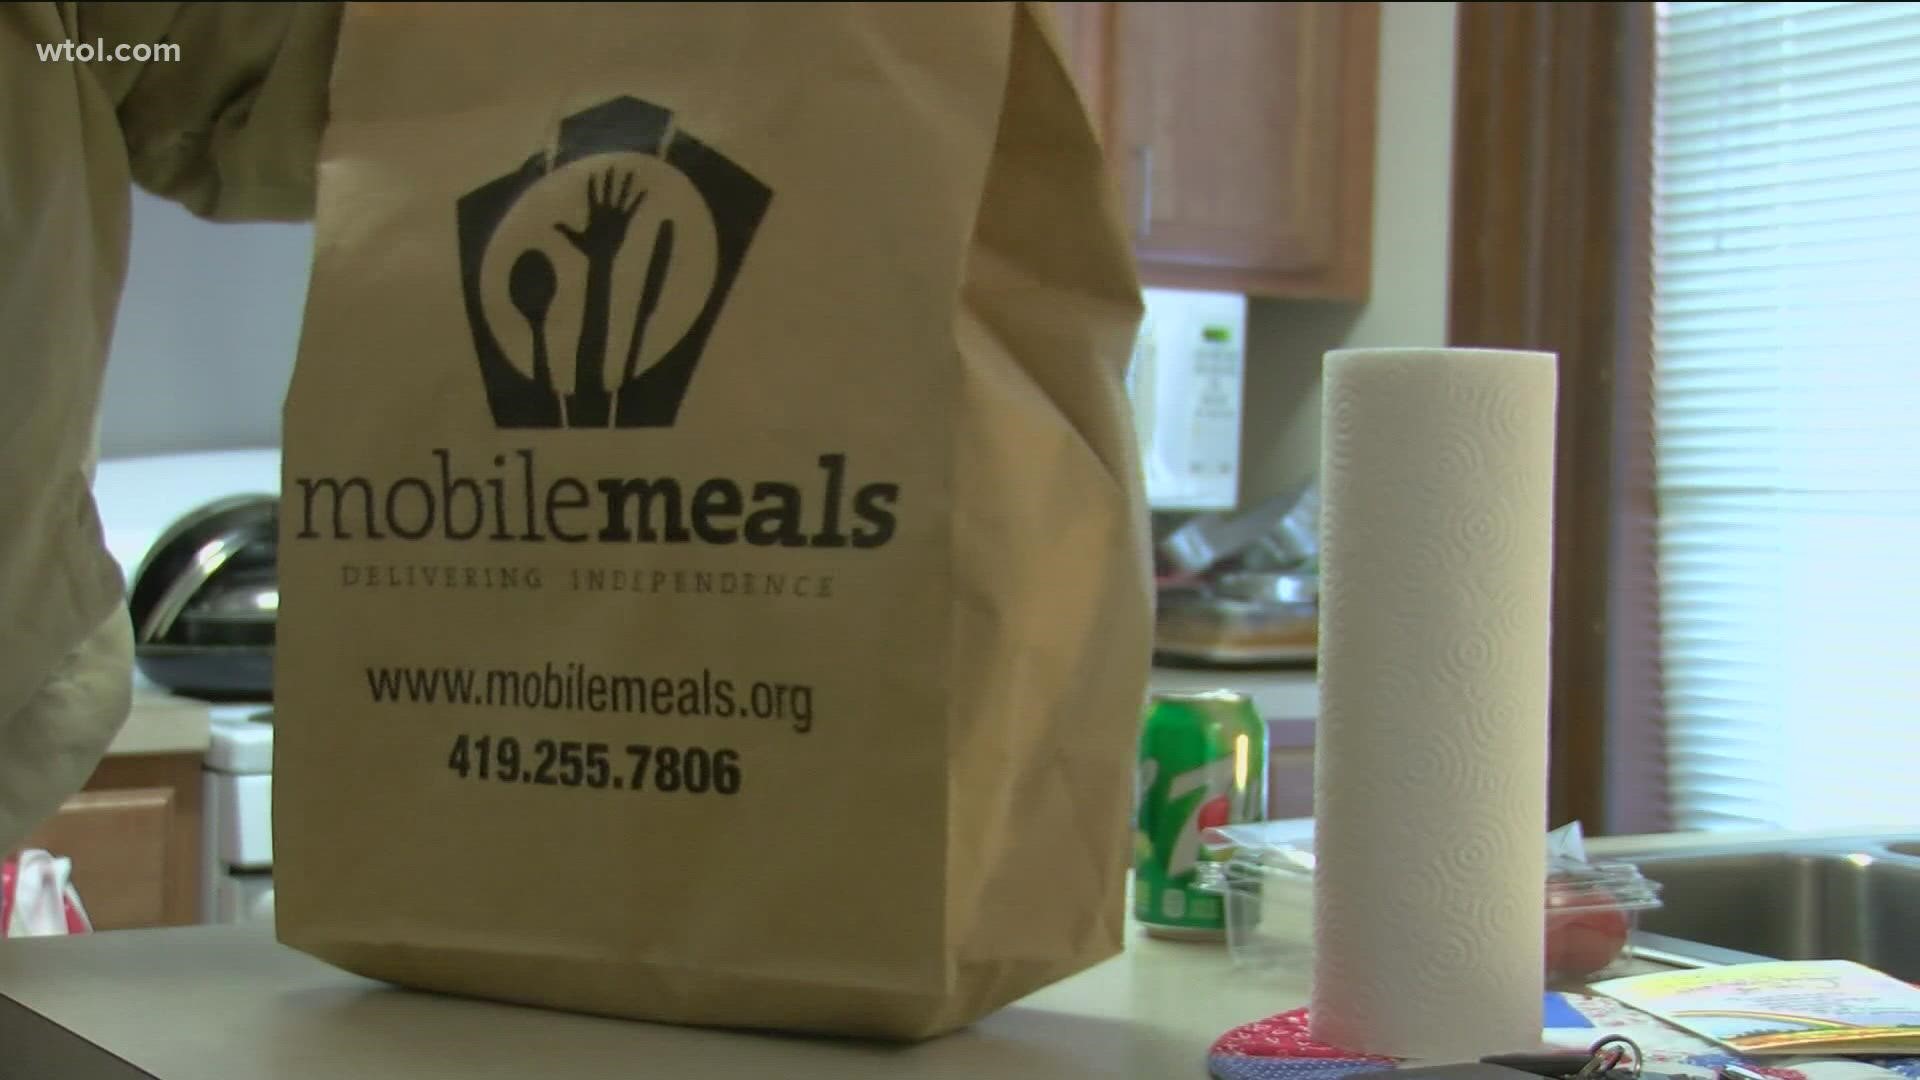 Mobile Meals relies on volunteers to drive food to homebound clients in the region. The agency is closely watching gas prices.